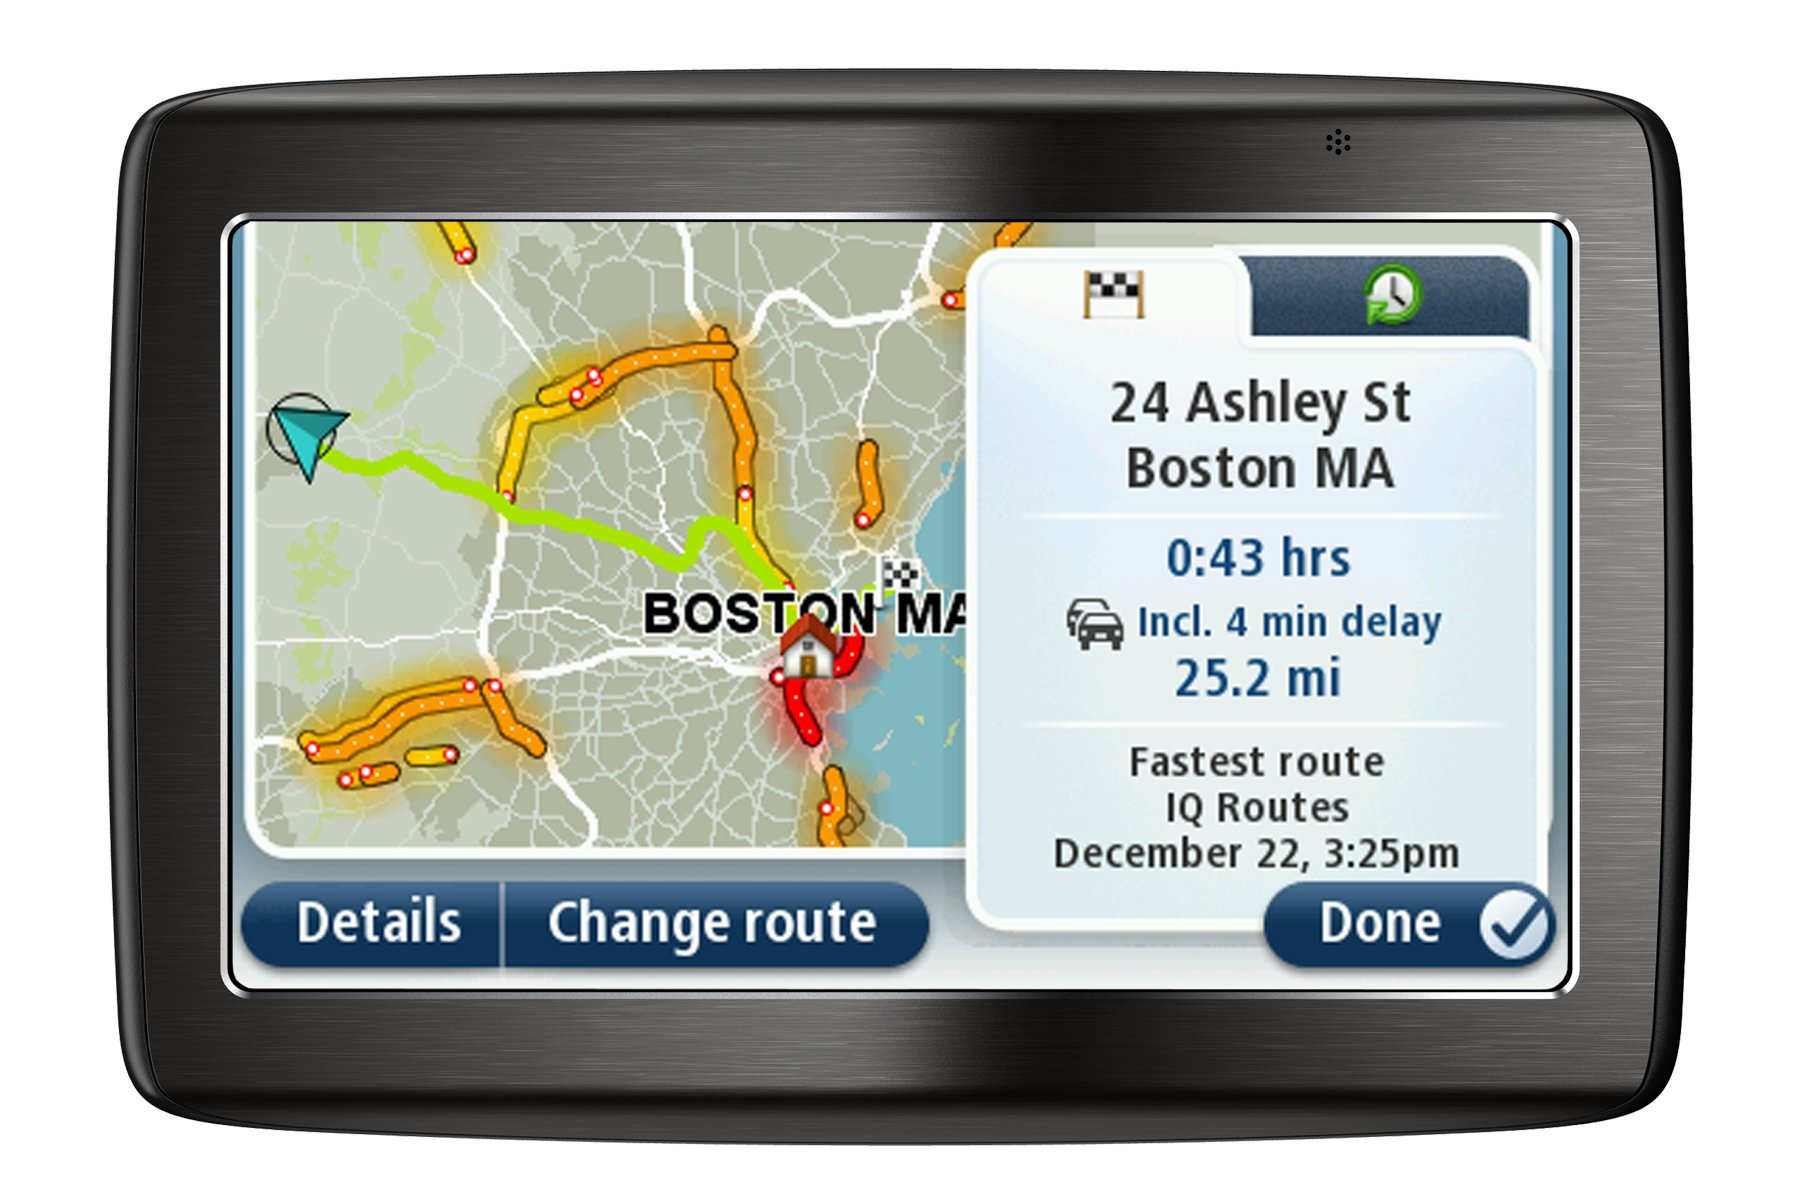 TomTom VIA 1535TM 5-Inch Bluetooth GPS Navigator with Lifetime Traffic & Maps and Voice Recognition